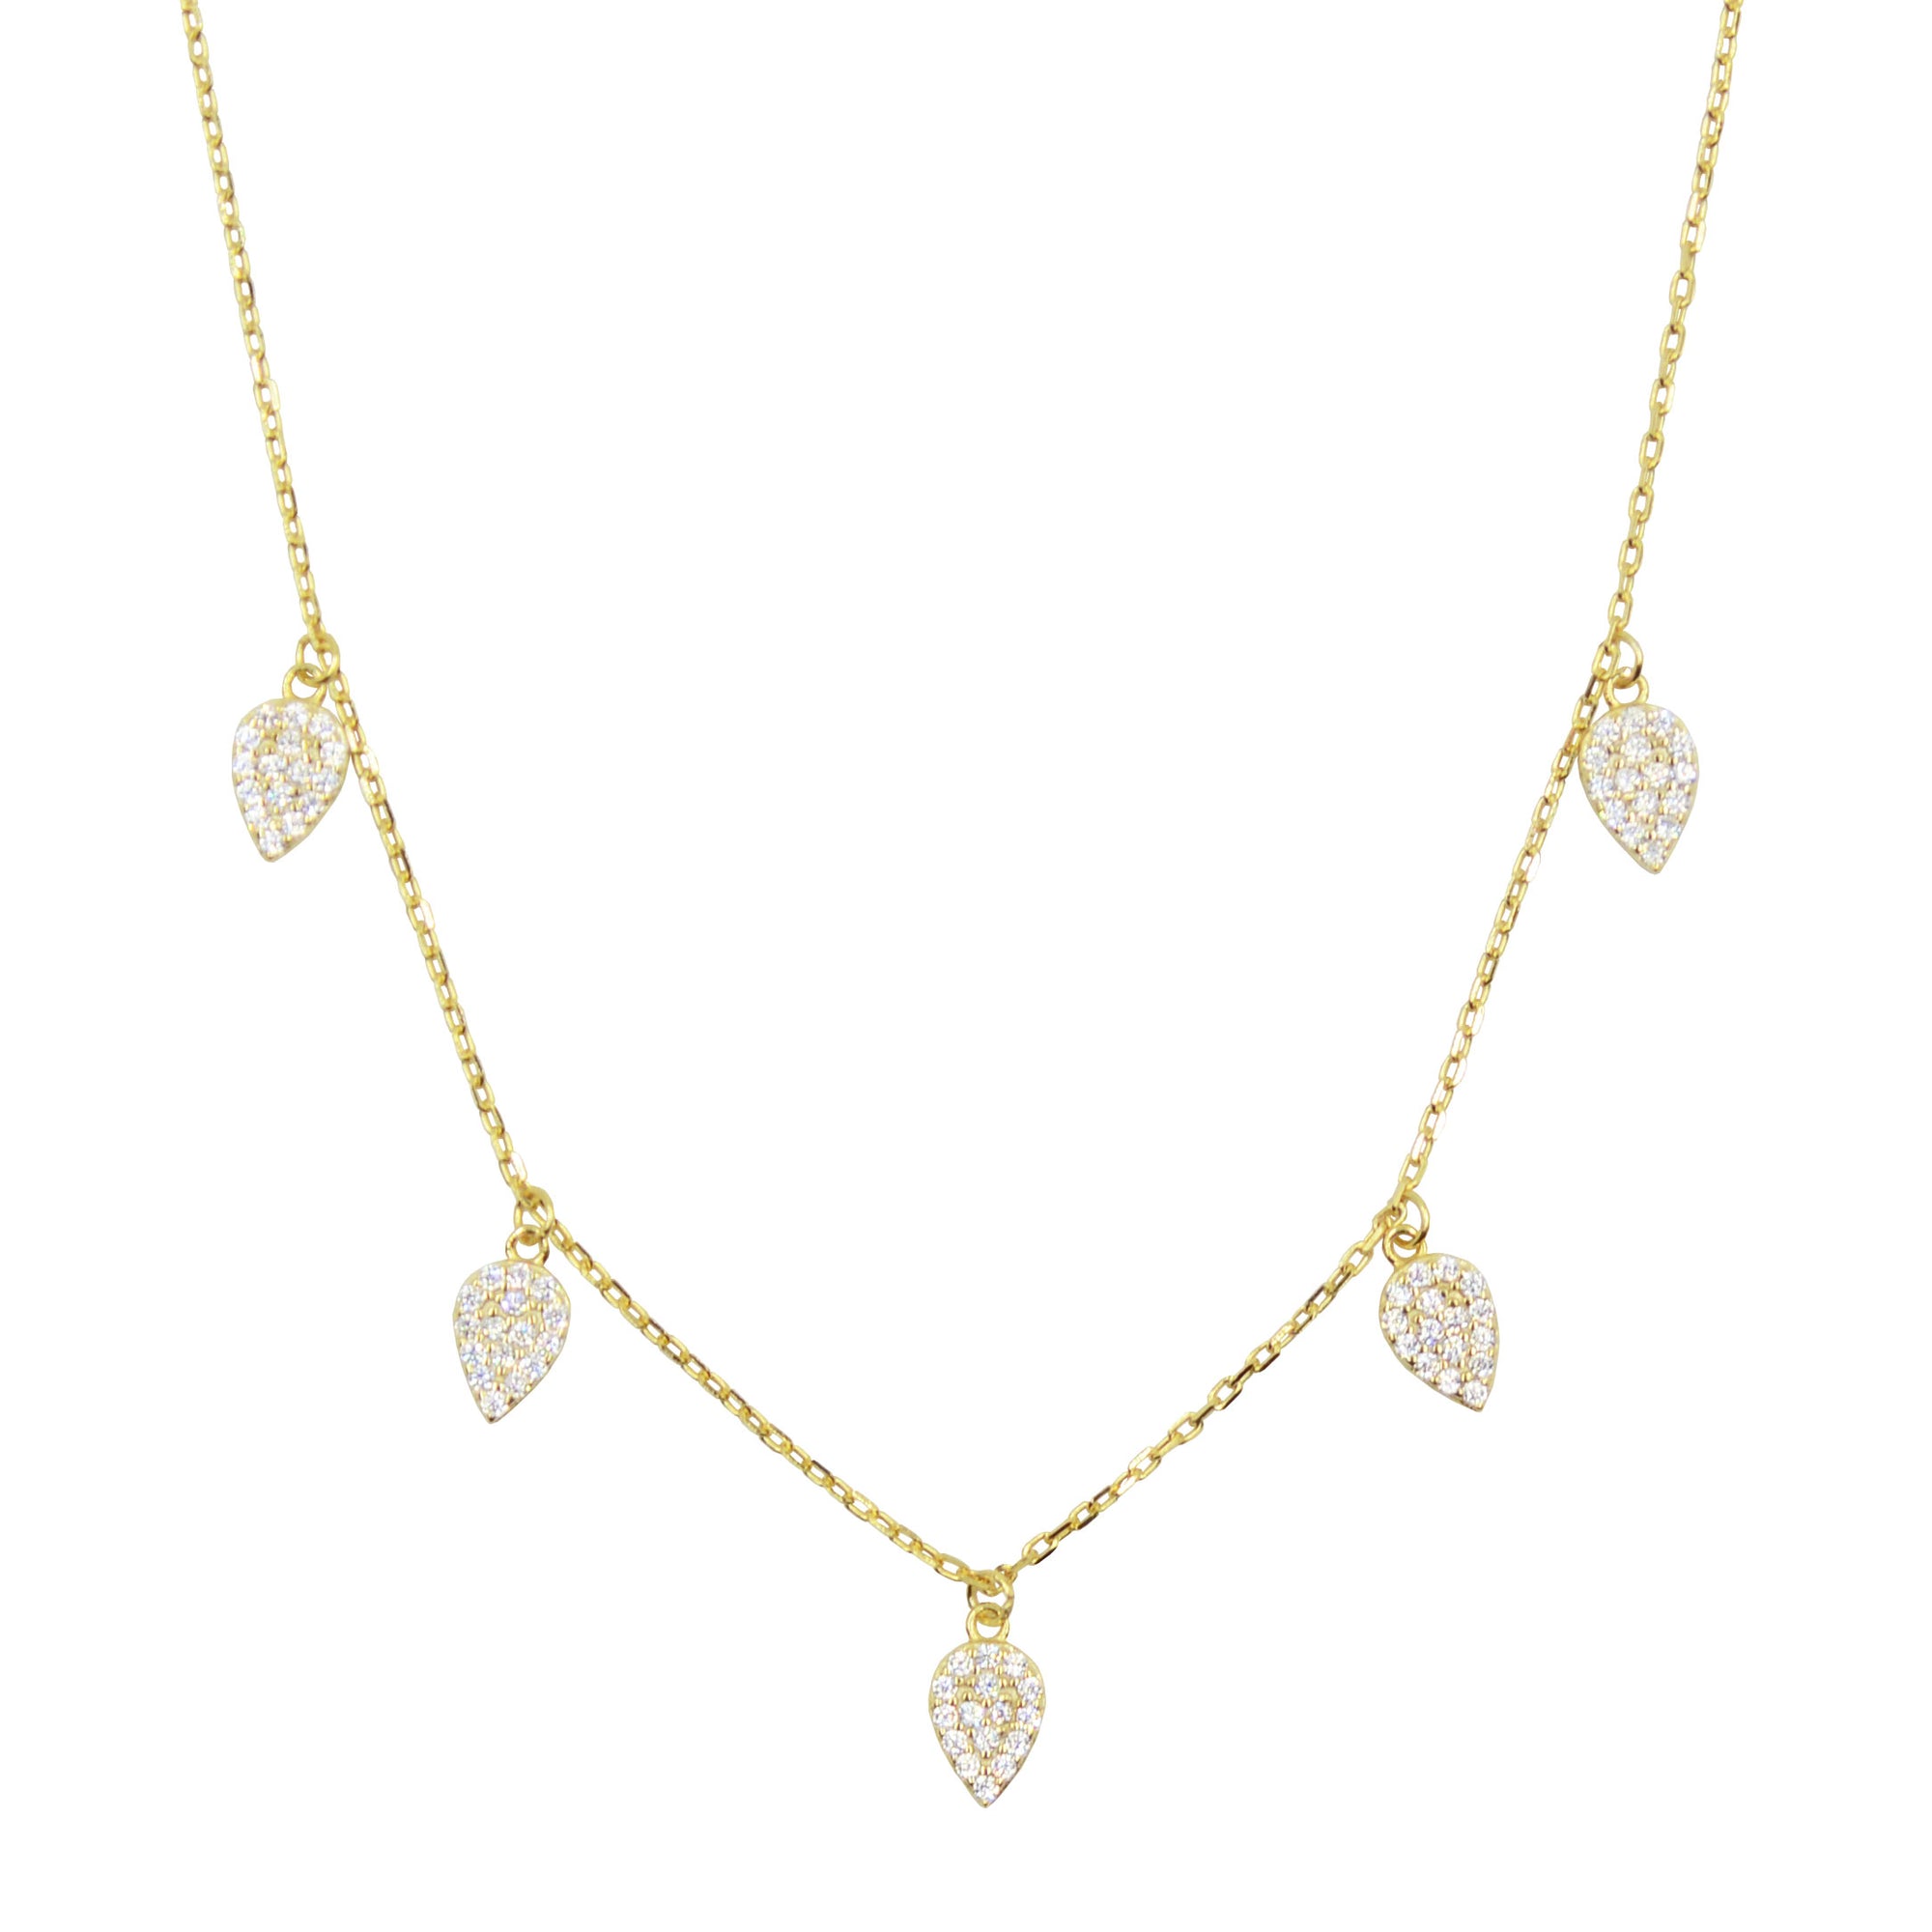 Blessings leaf choker necklace with crystals in yellow gold